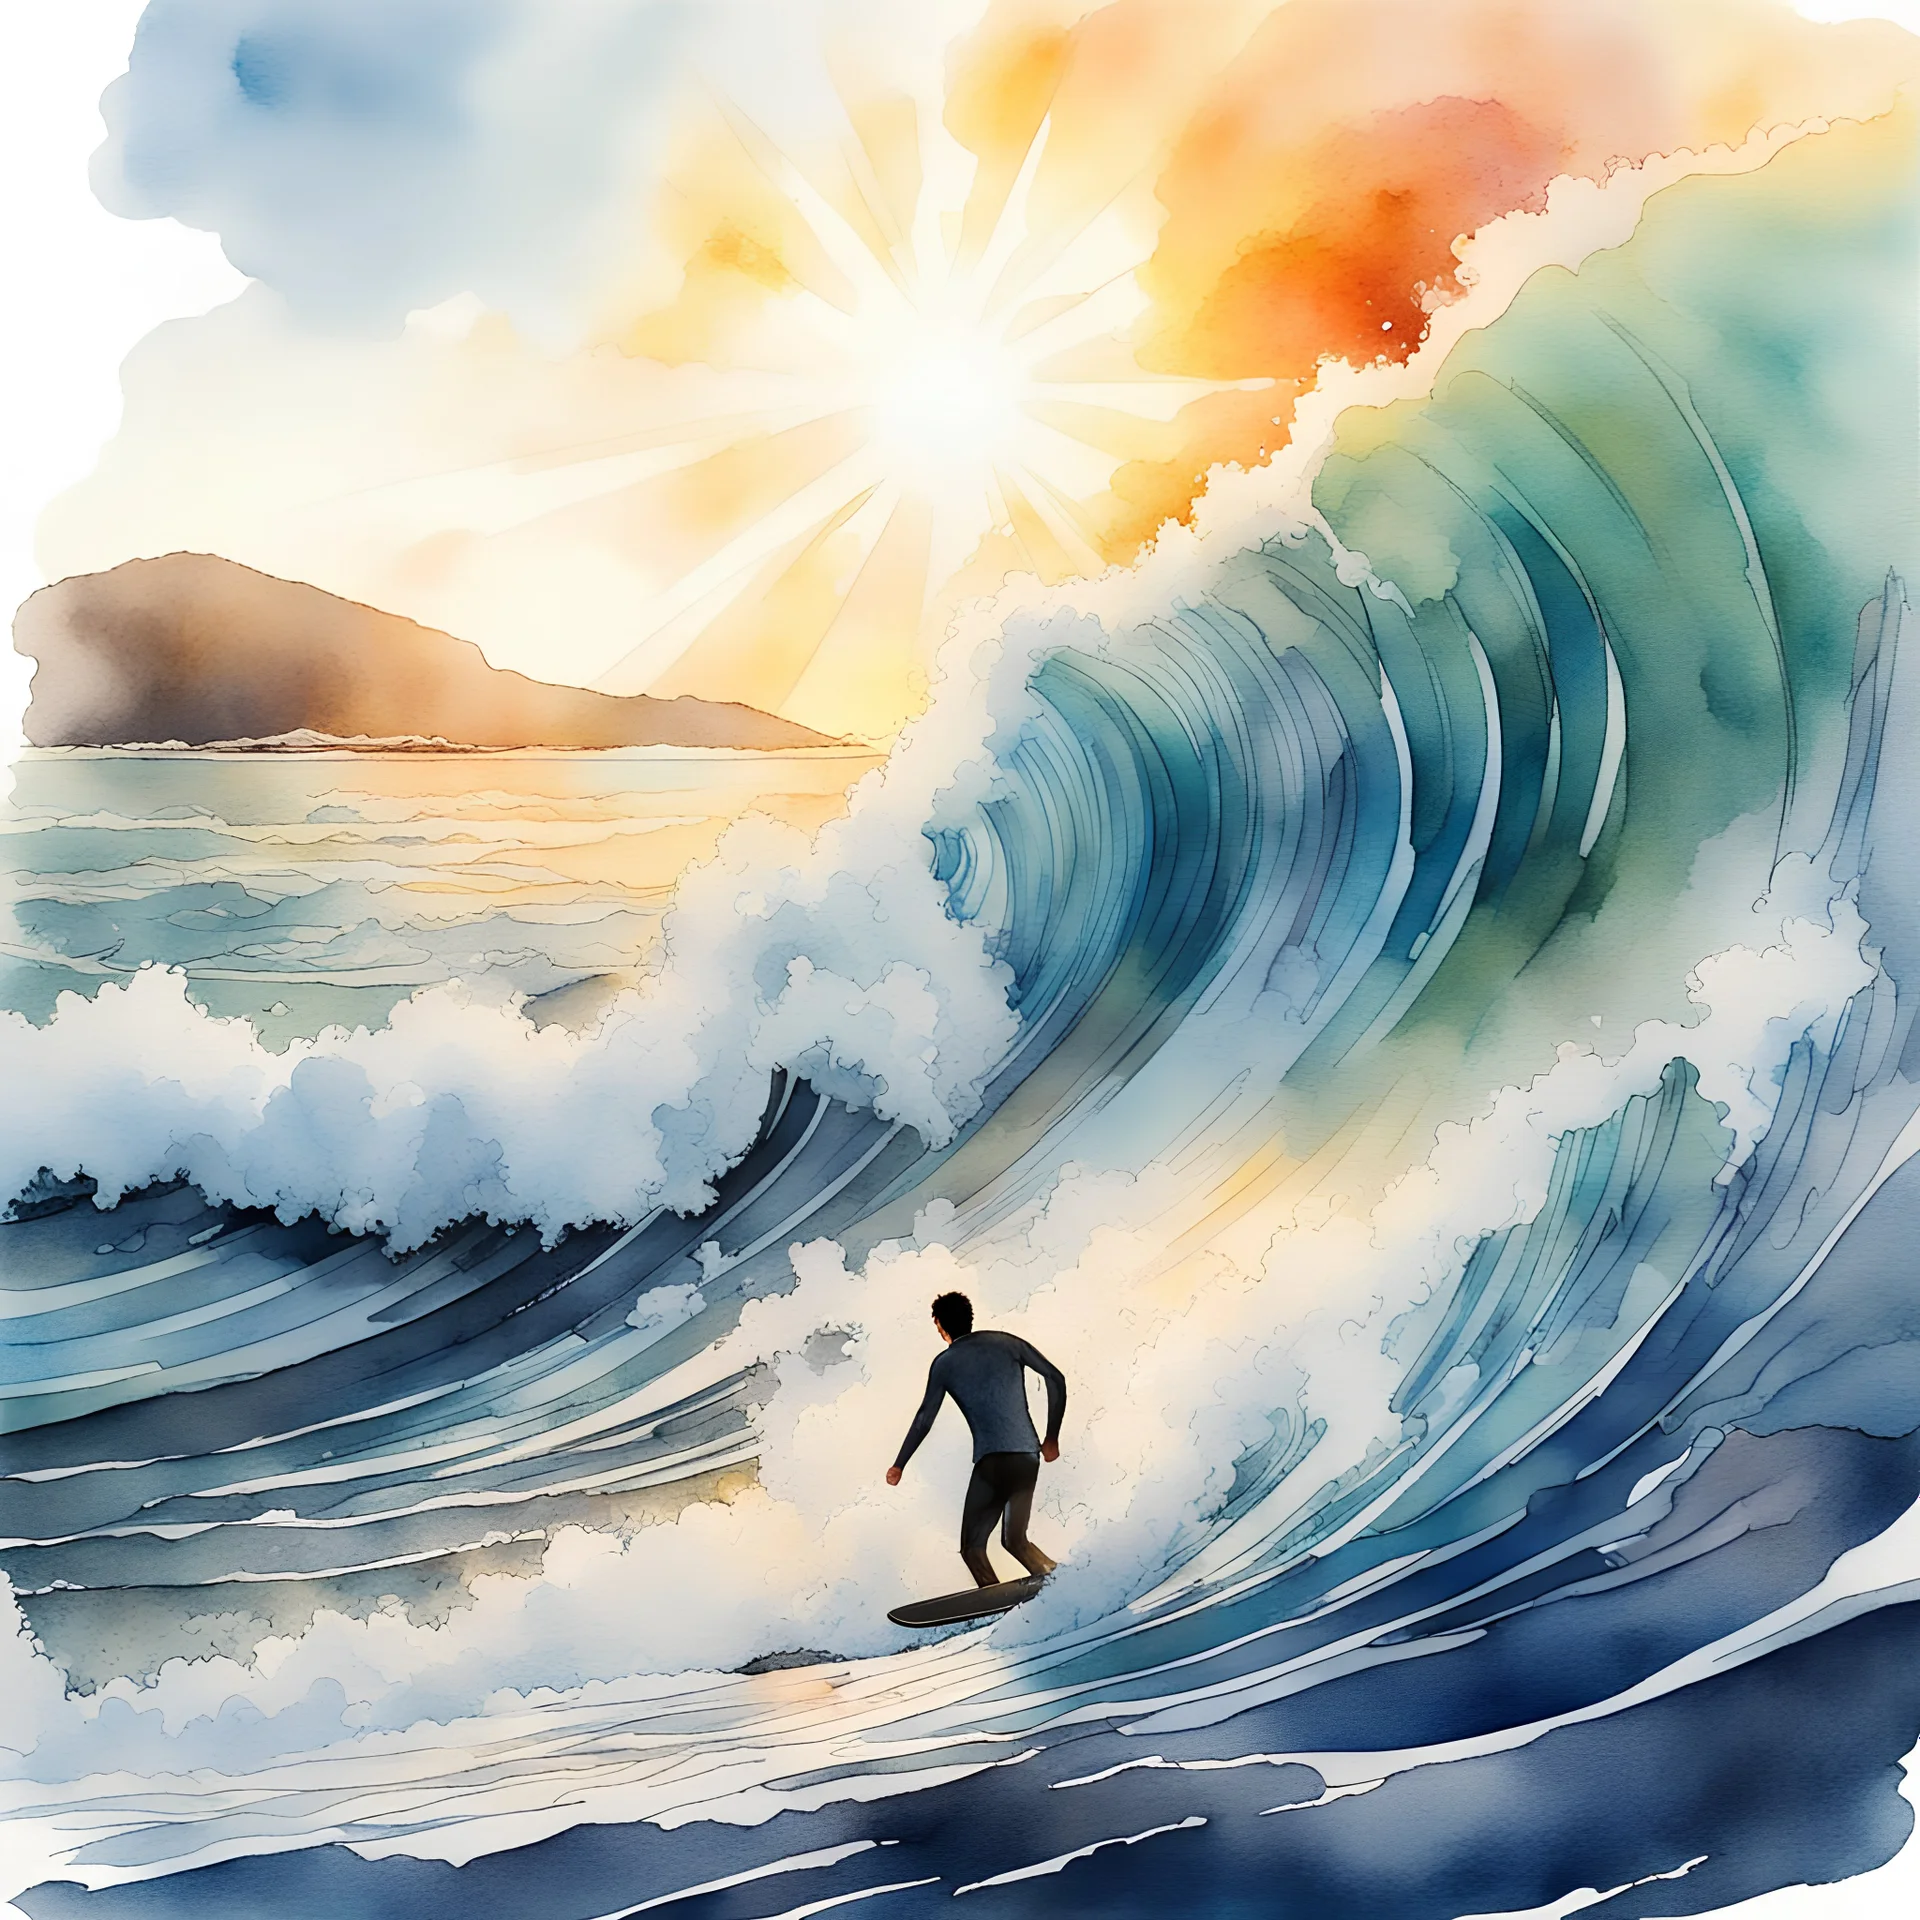 Watercolor and ink illustration, wave crashing out of the colliery ocean with a surfer, power of nature, early morning sun glare prismatic effect,